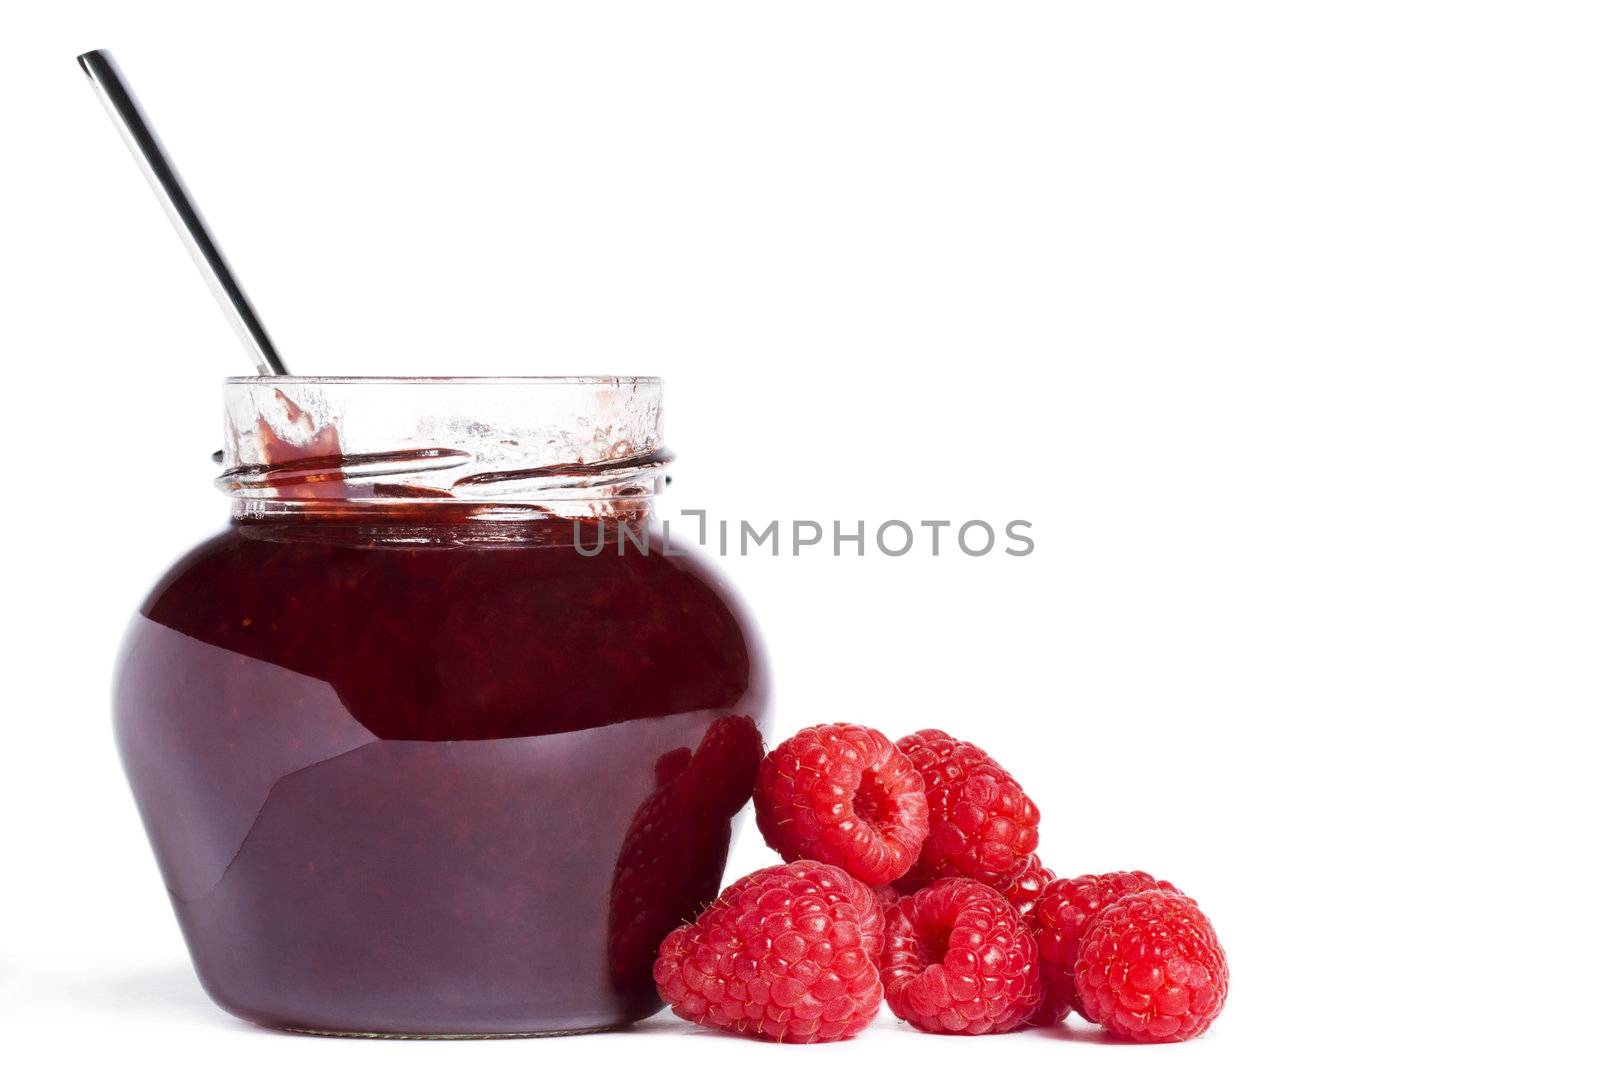  raspberry jam jar with a spoon and raspberries aside on white background